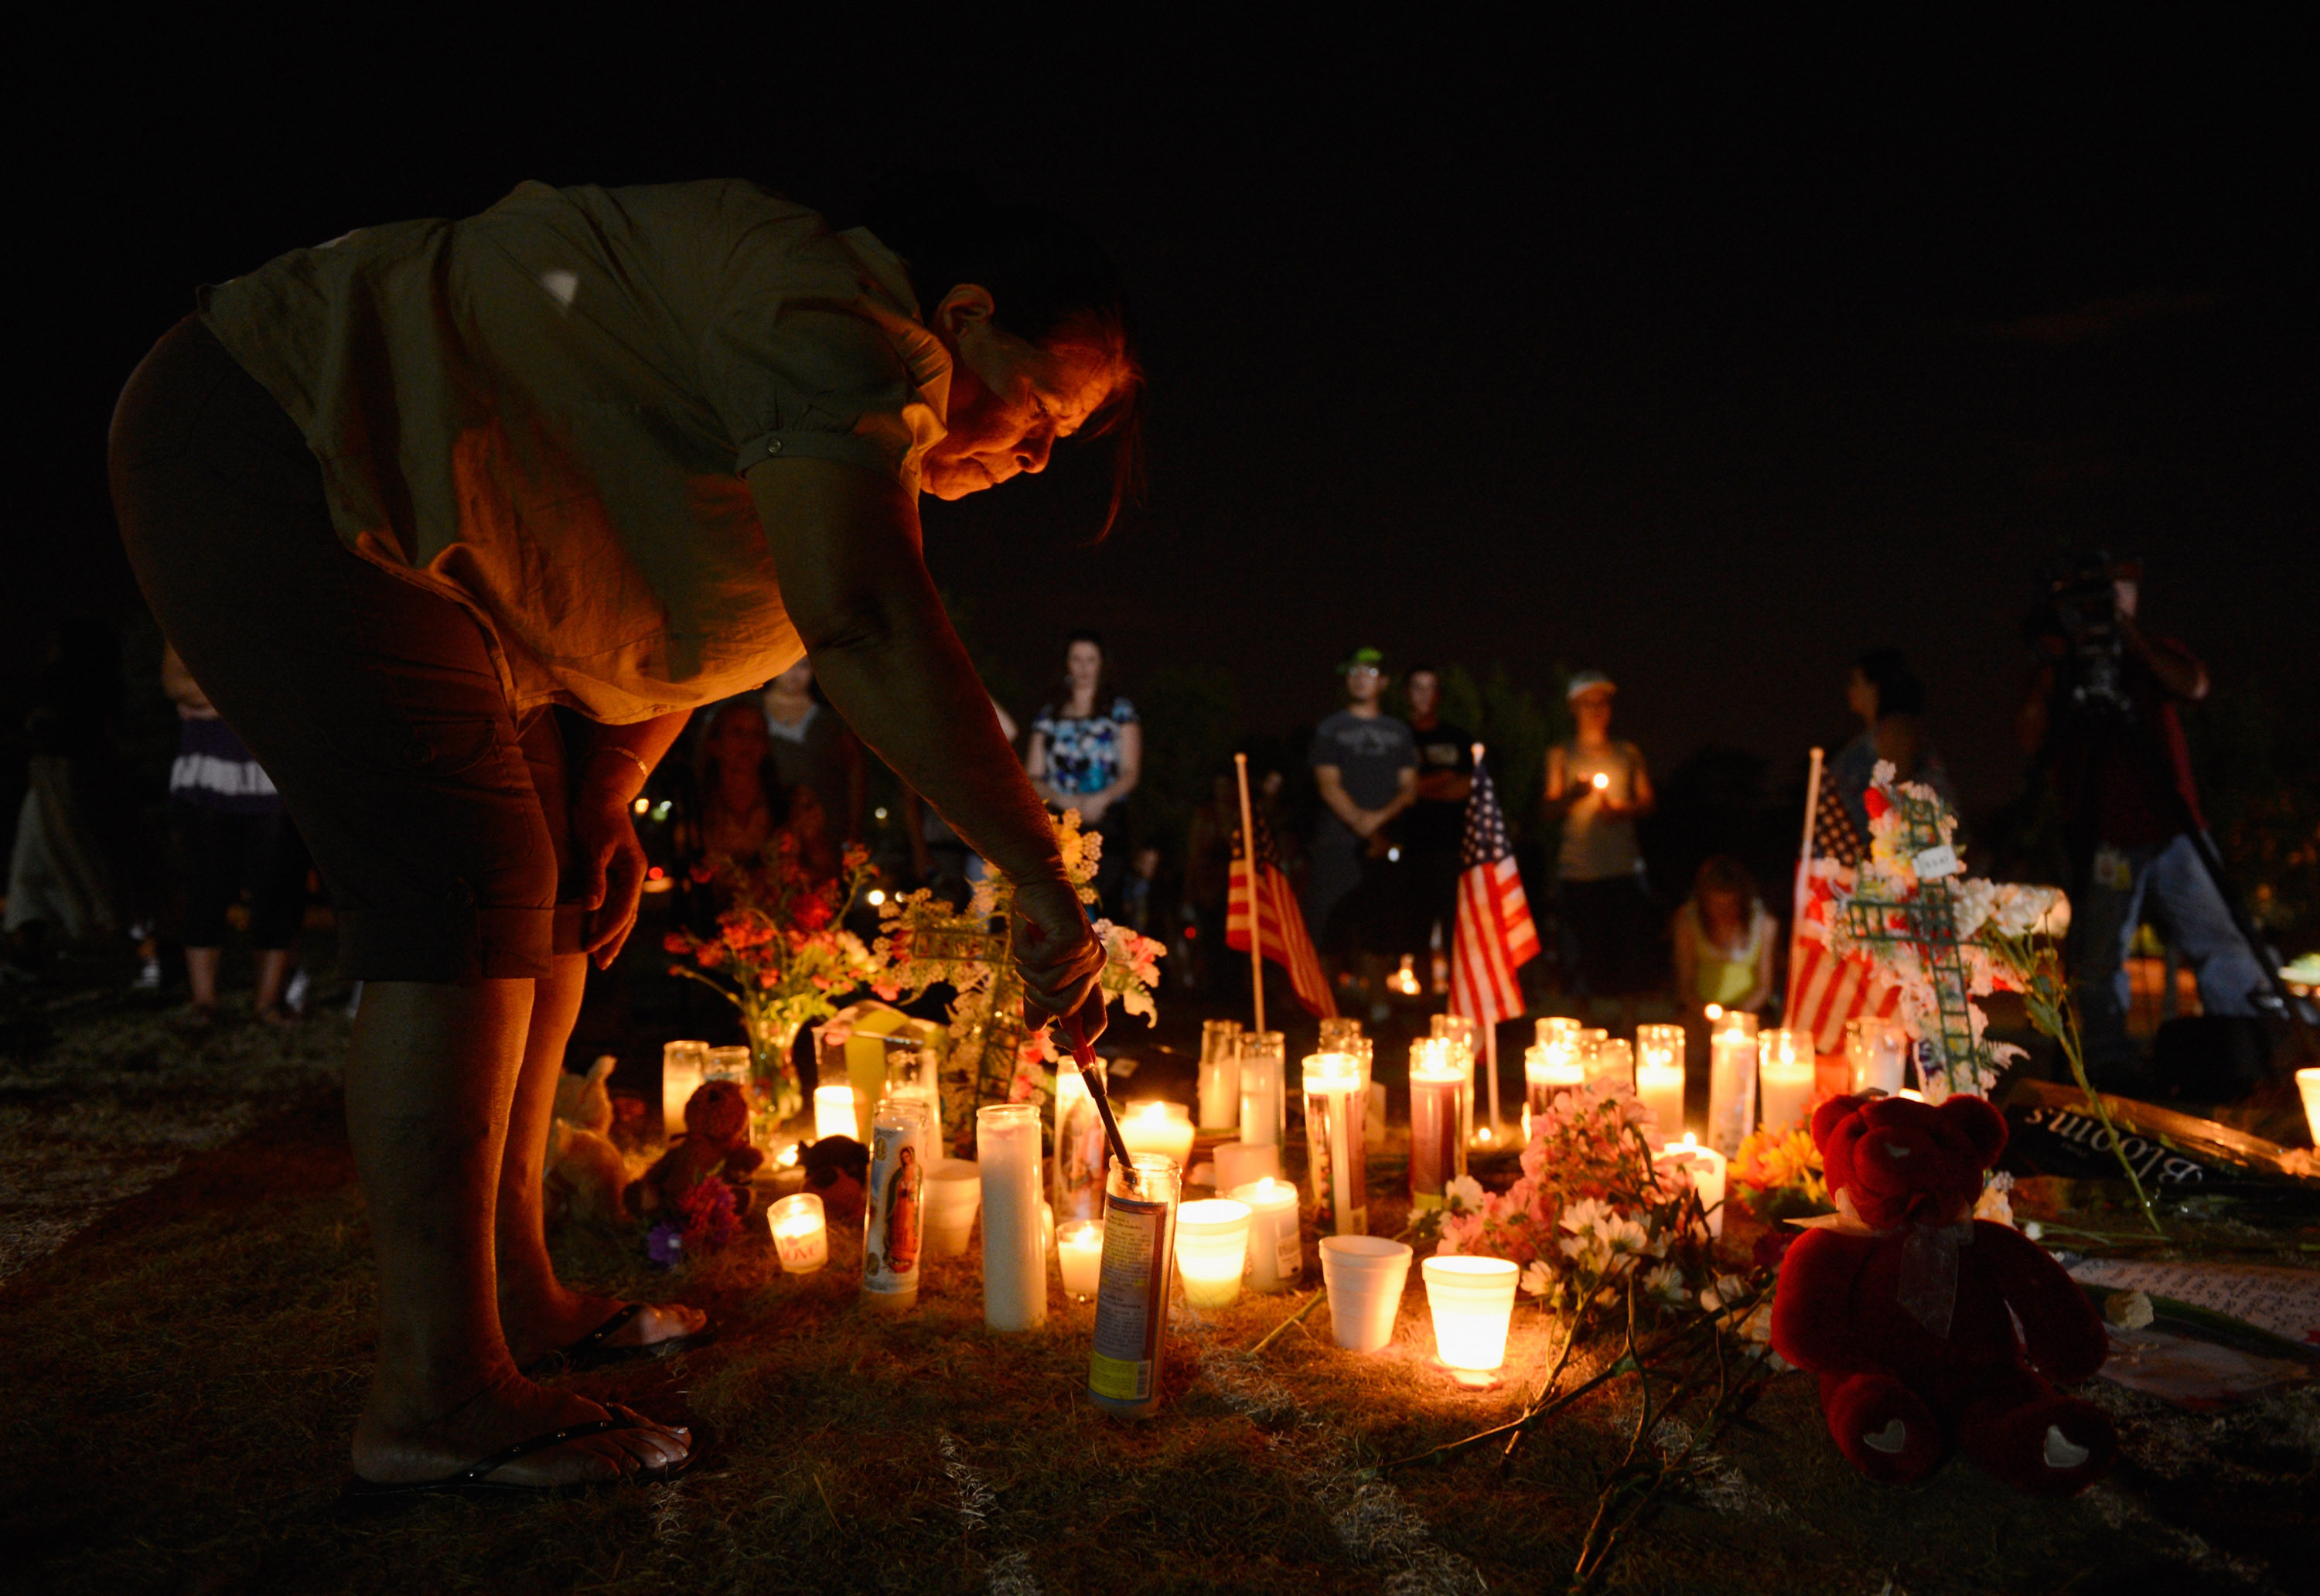 A woman lights candles at a makeshift memorial during a vigil for victims of the Century 16 movie theatre where a gunmen attacked movie goers during an early morning screening of the new Batman movie "The Dark Knight Rises" on July 20, 2012, in Aurora, Colorado. 